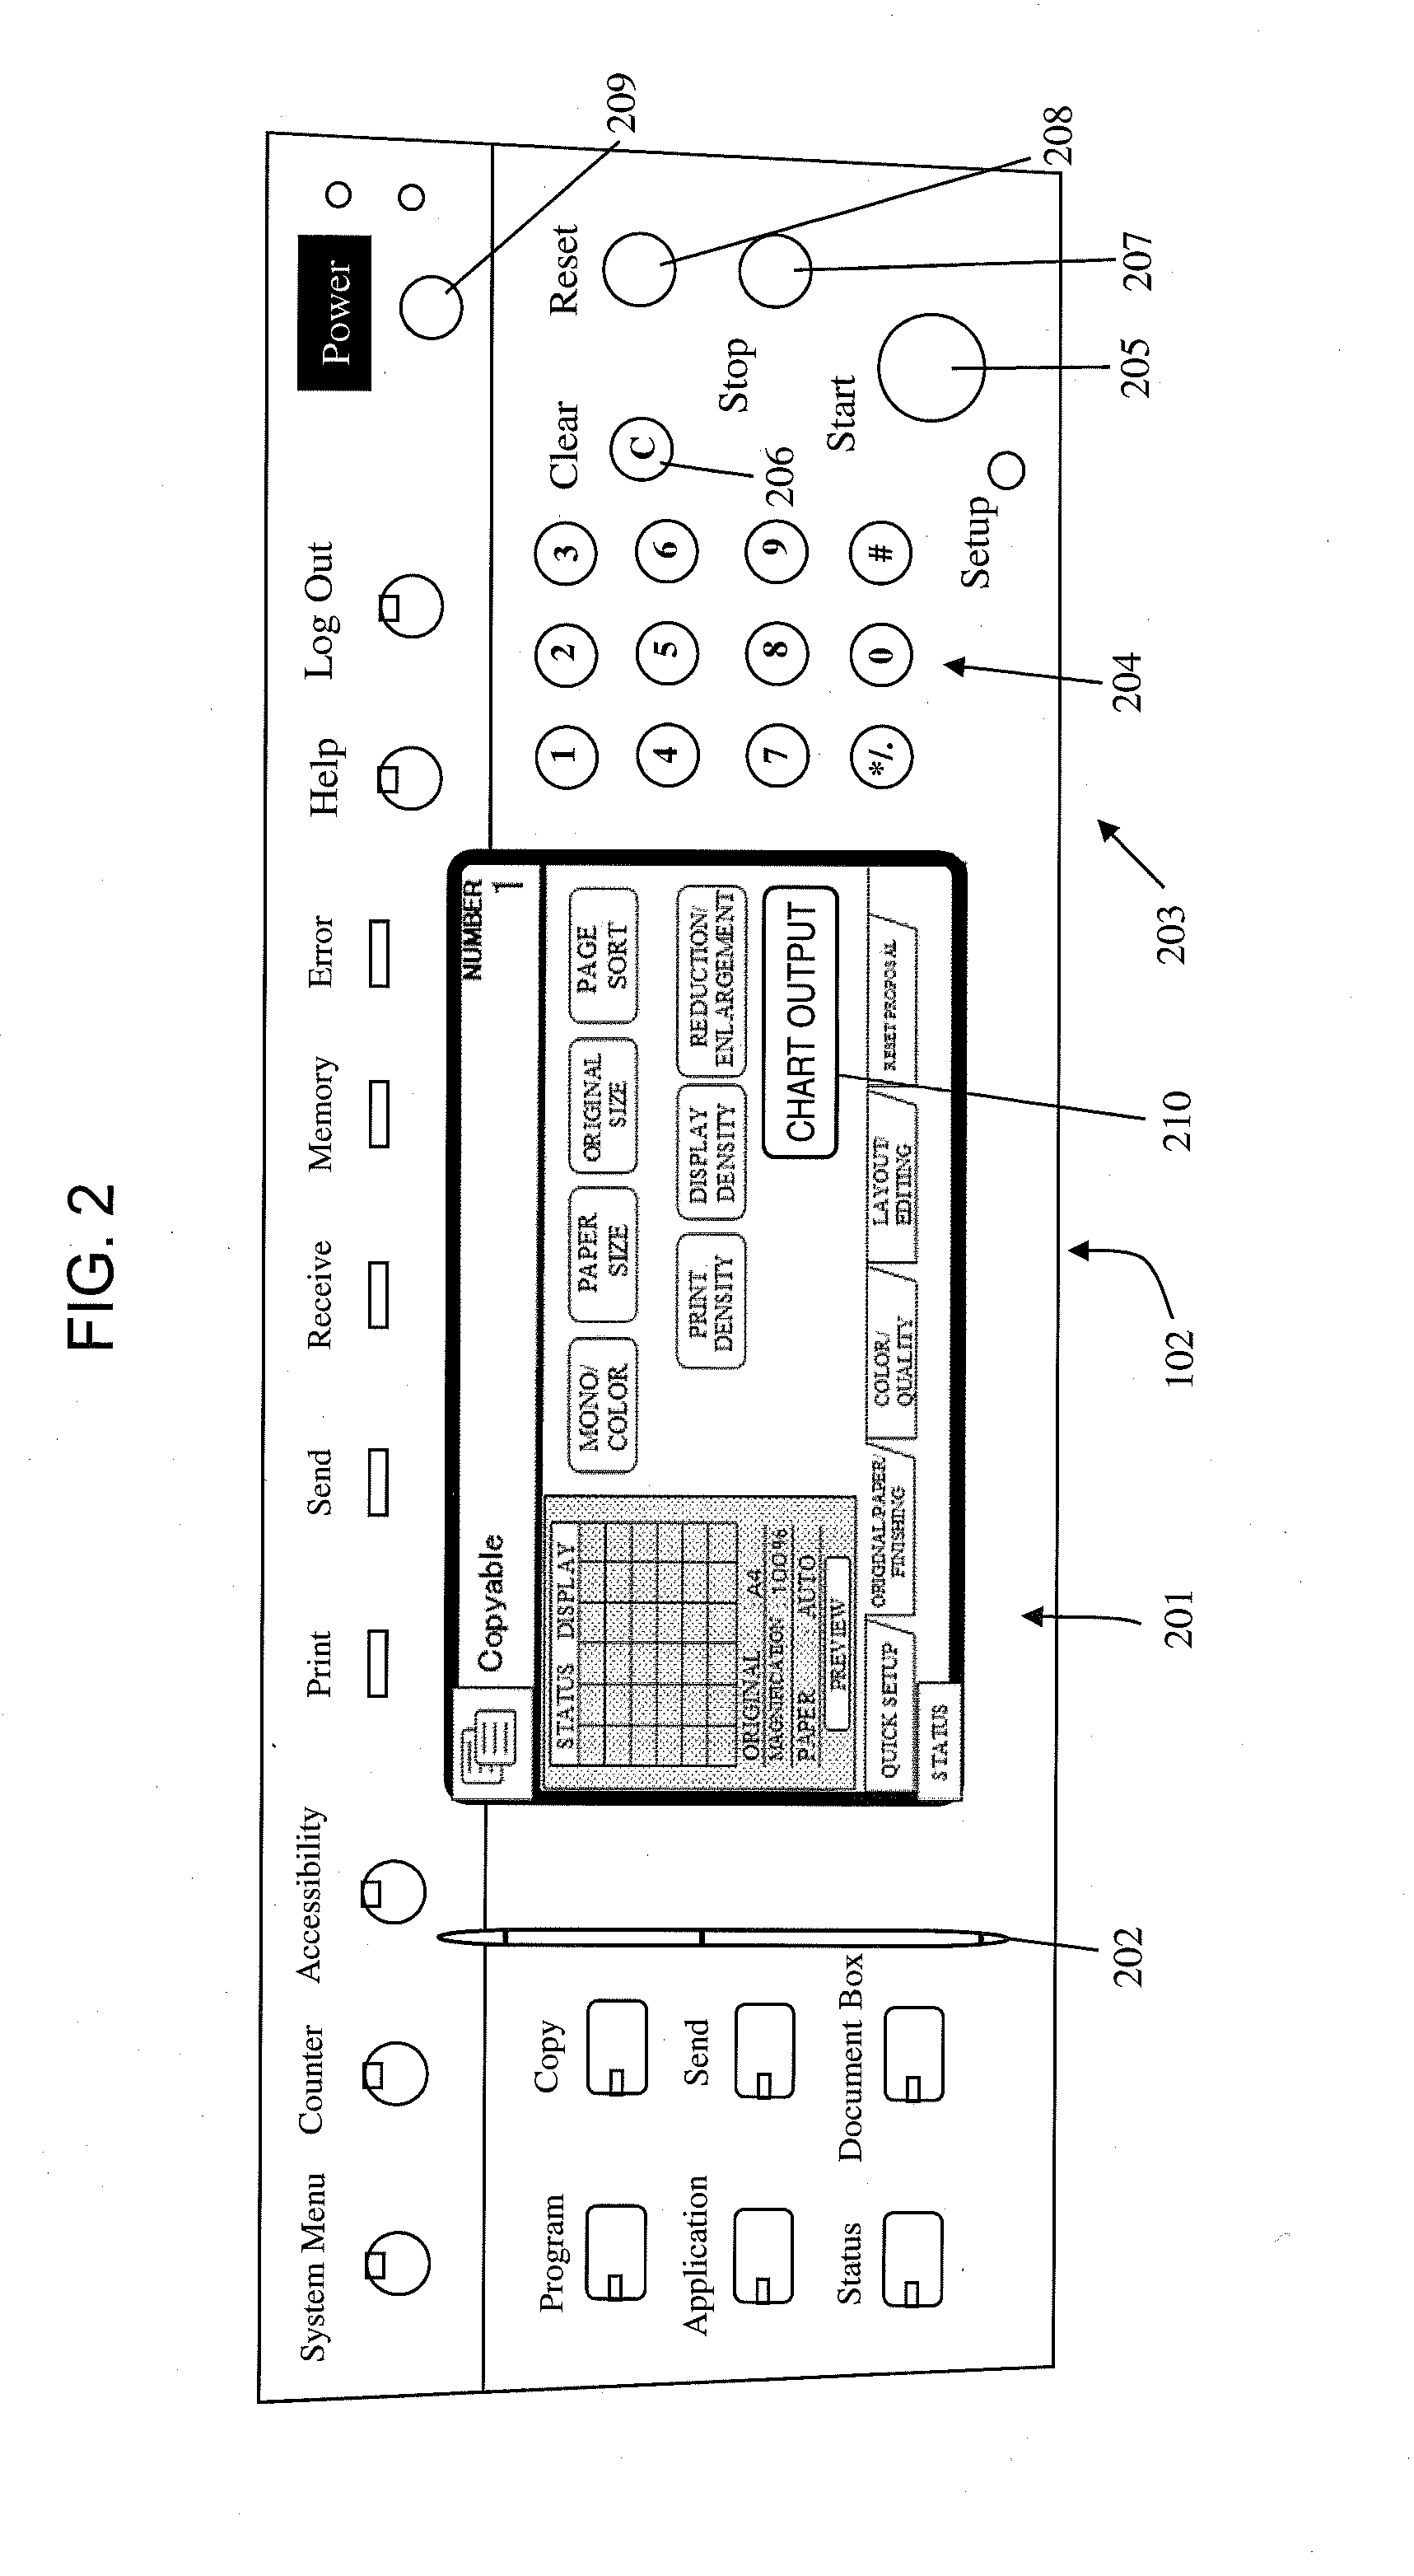 Image forming apparatus and maintenance method therefor